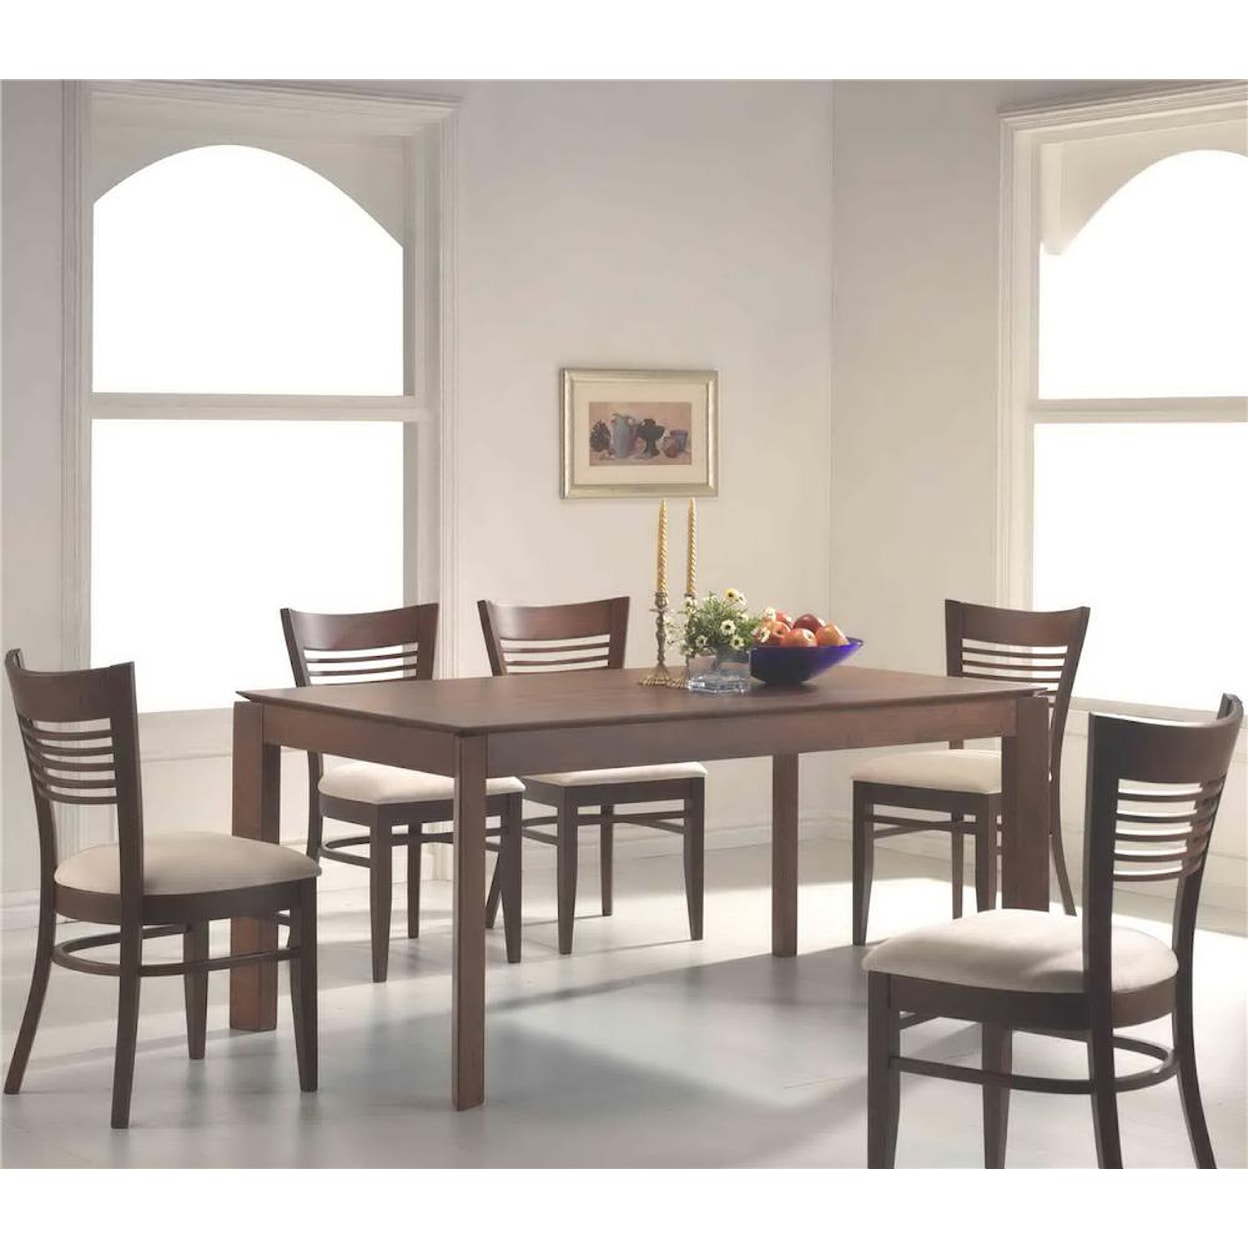 Primo International 6730 Table and Chair Set